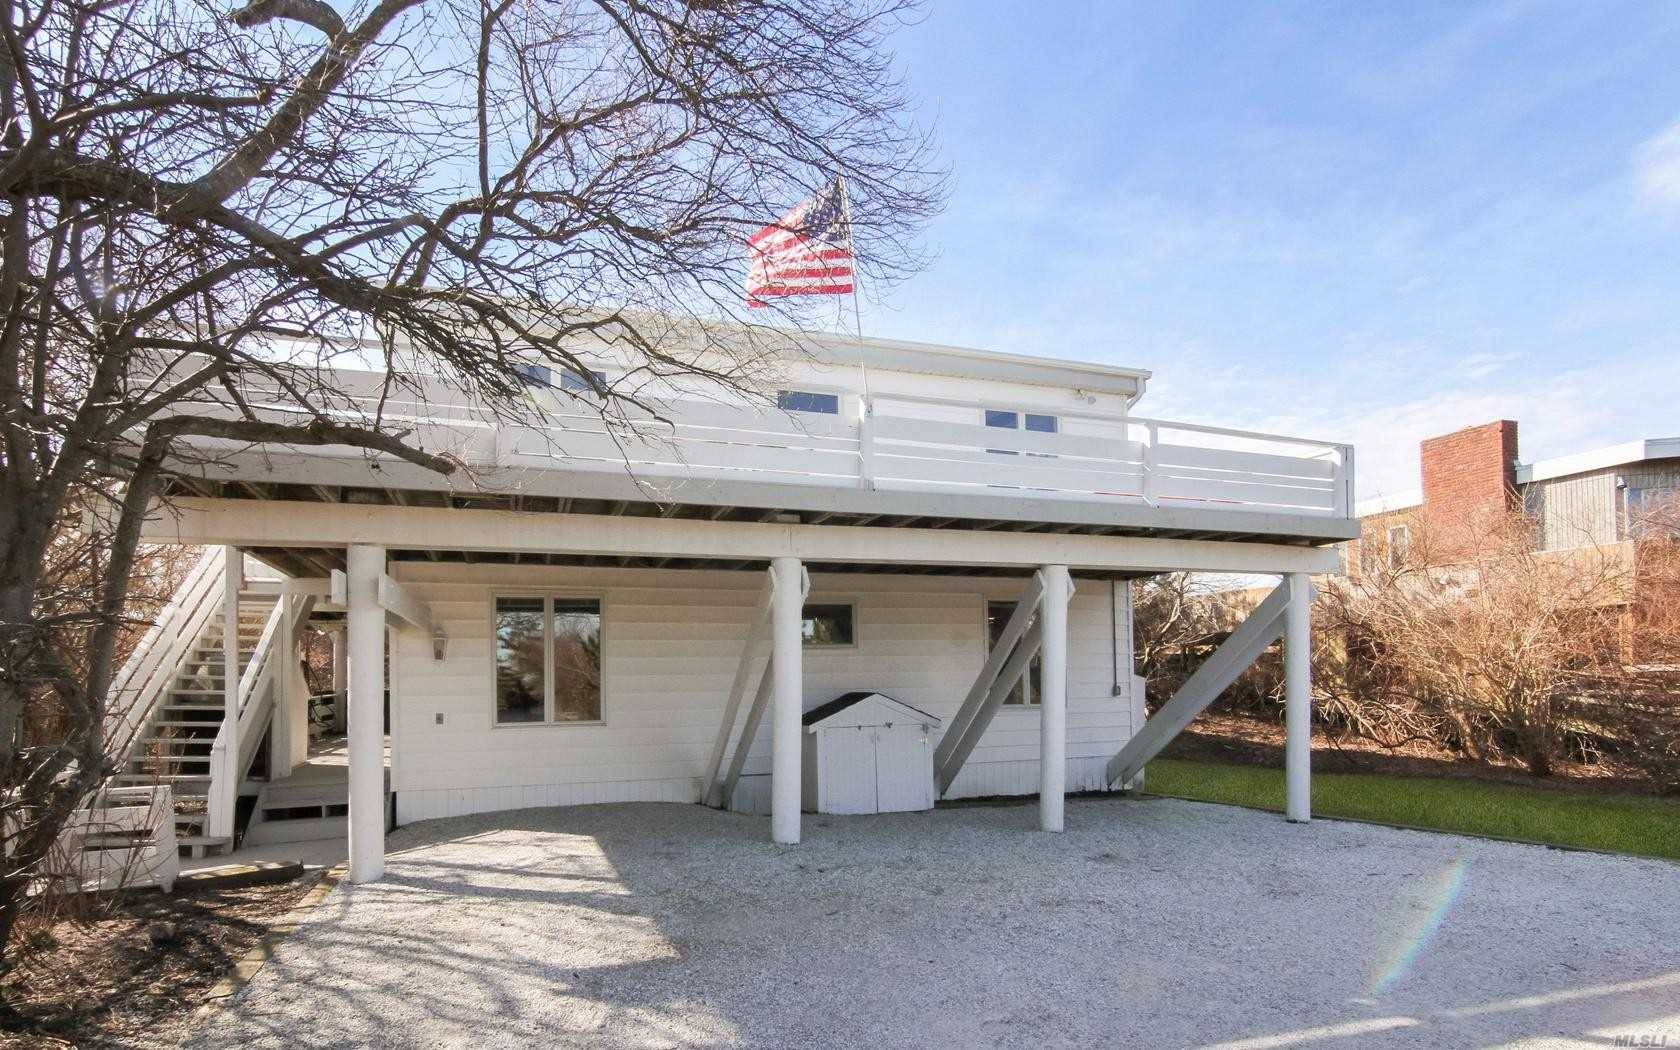 Mid Century Modern Oceanfront Bungalow 4 bedroom beach house sited on over a half acre with 78 feet of ocean frontage.